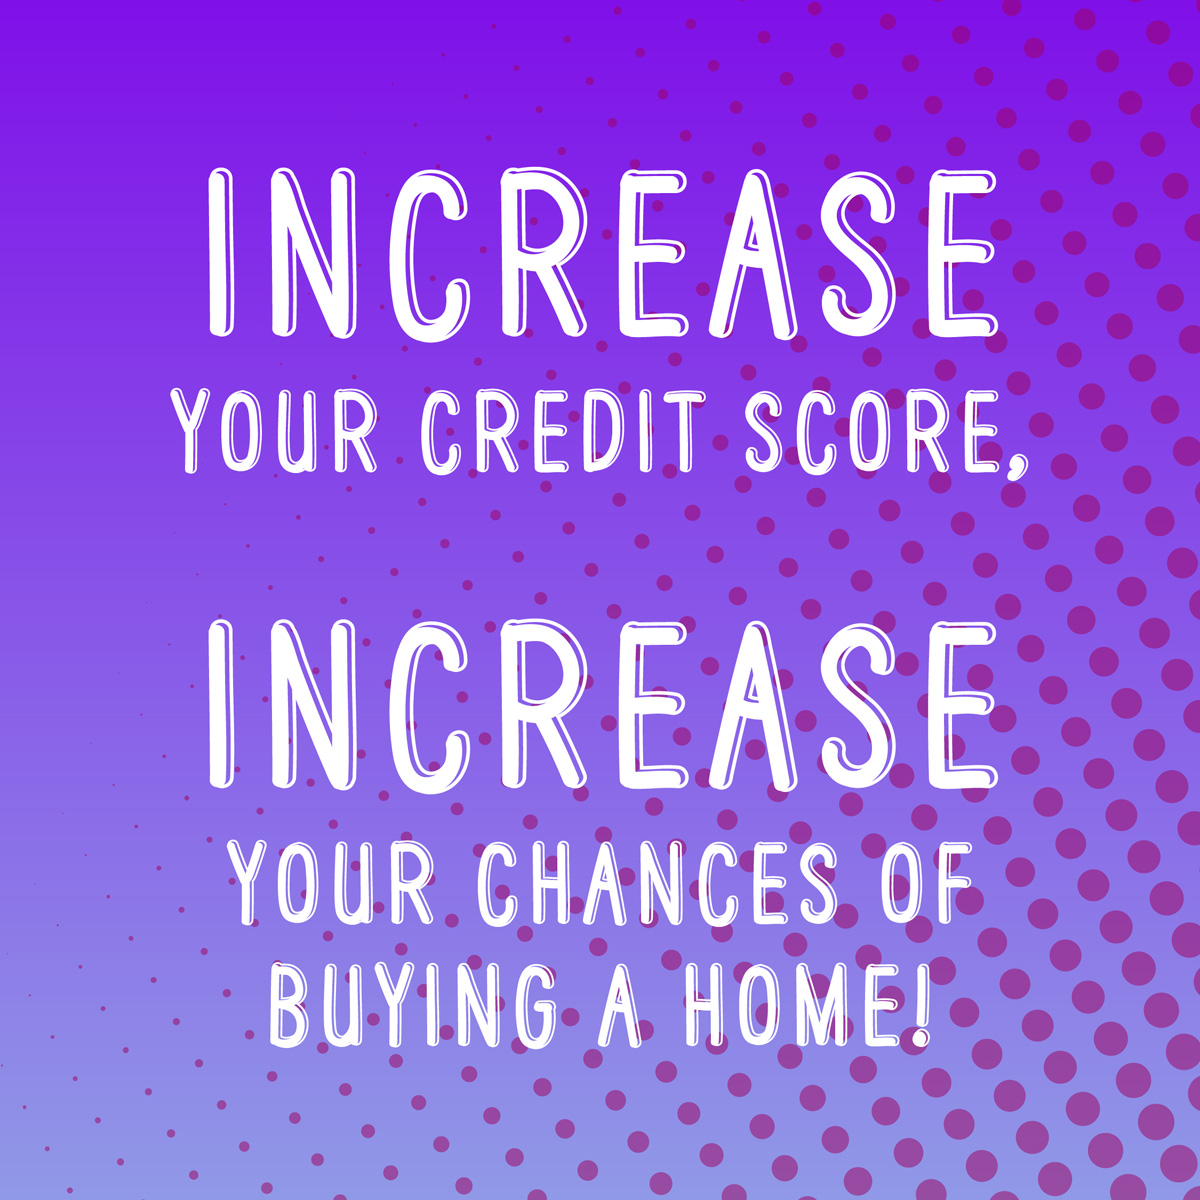 Want to increase your credit score and improve your chances of qualifying for a home? Try doing things like paying down debt, making timely bill payments and keeping your credit card balances low.  #designhomeloans #deliveringmore